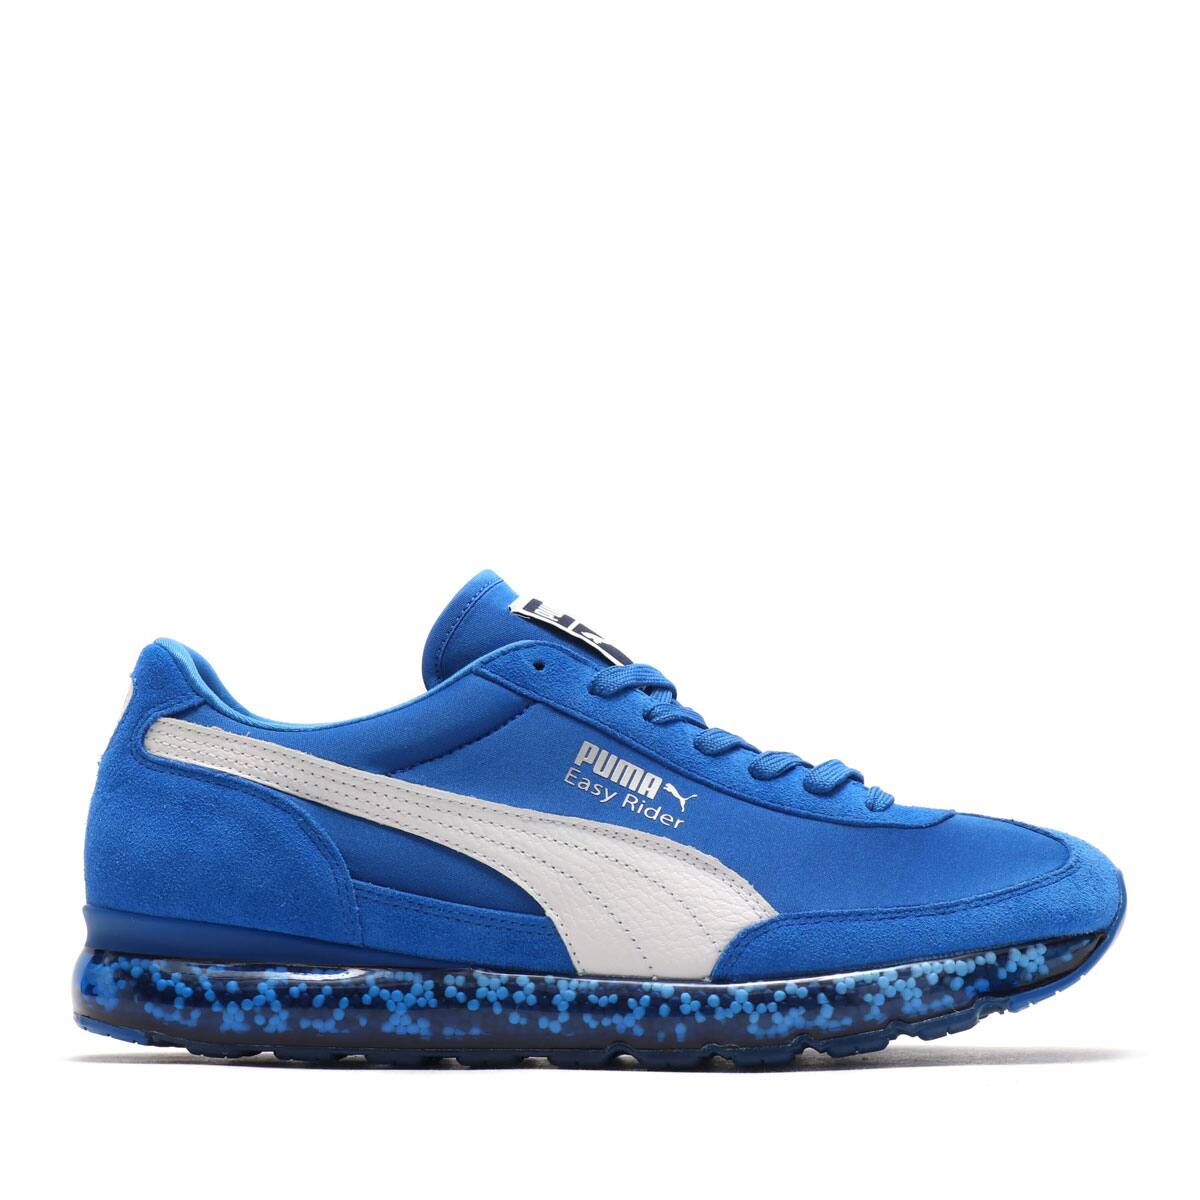 PUMA JAMMING EASY RIDER STRONG BLUE-P